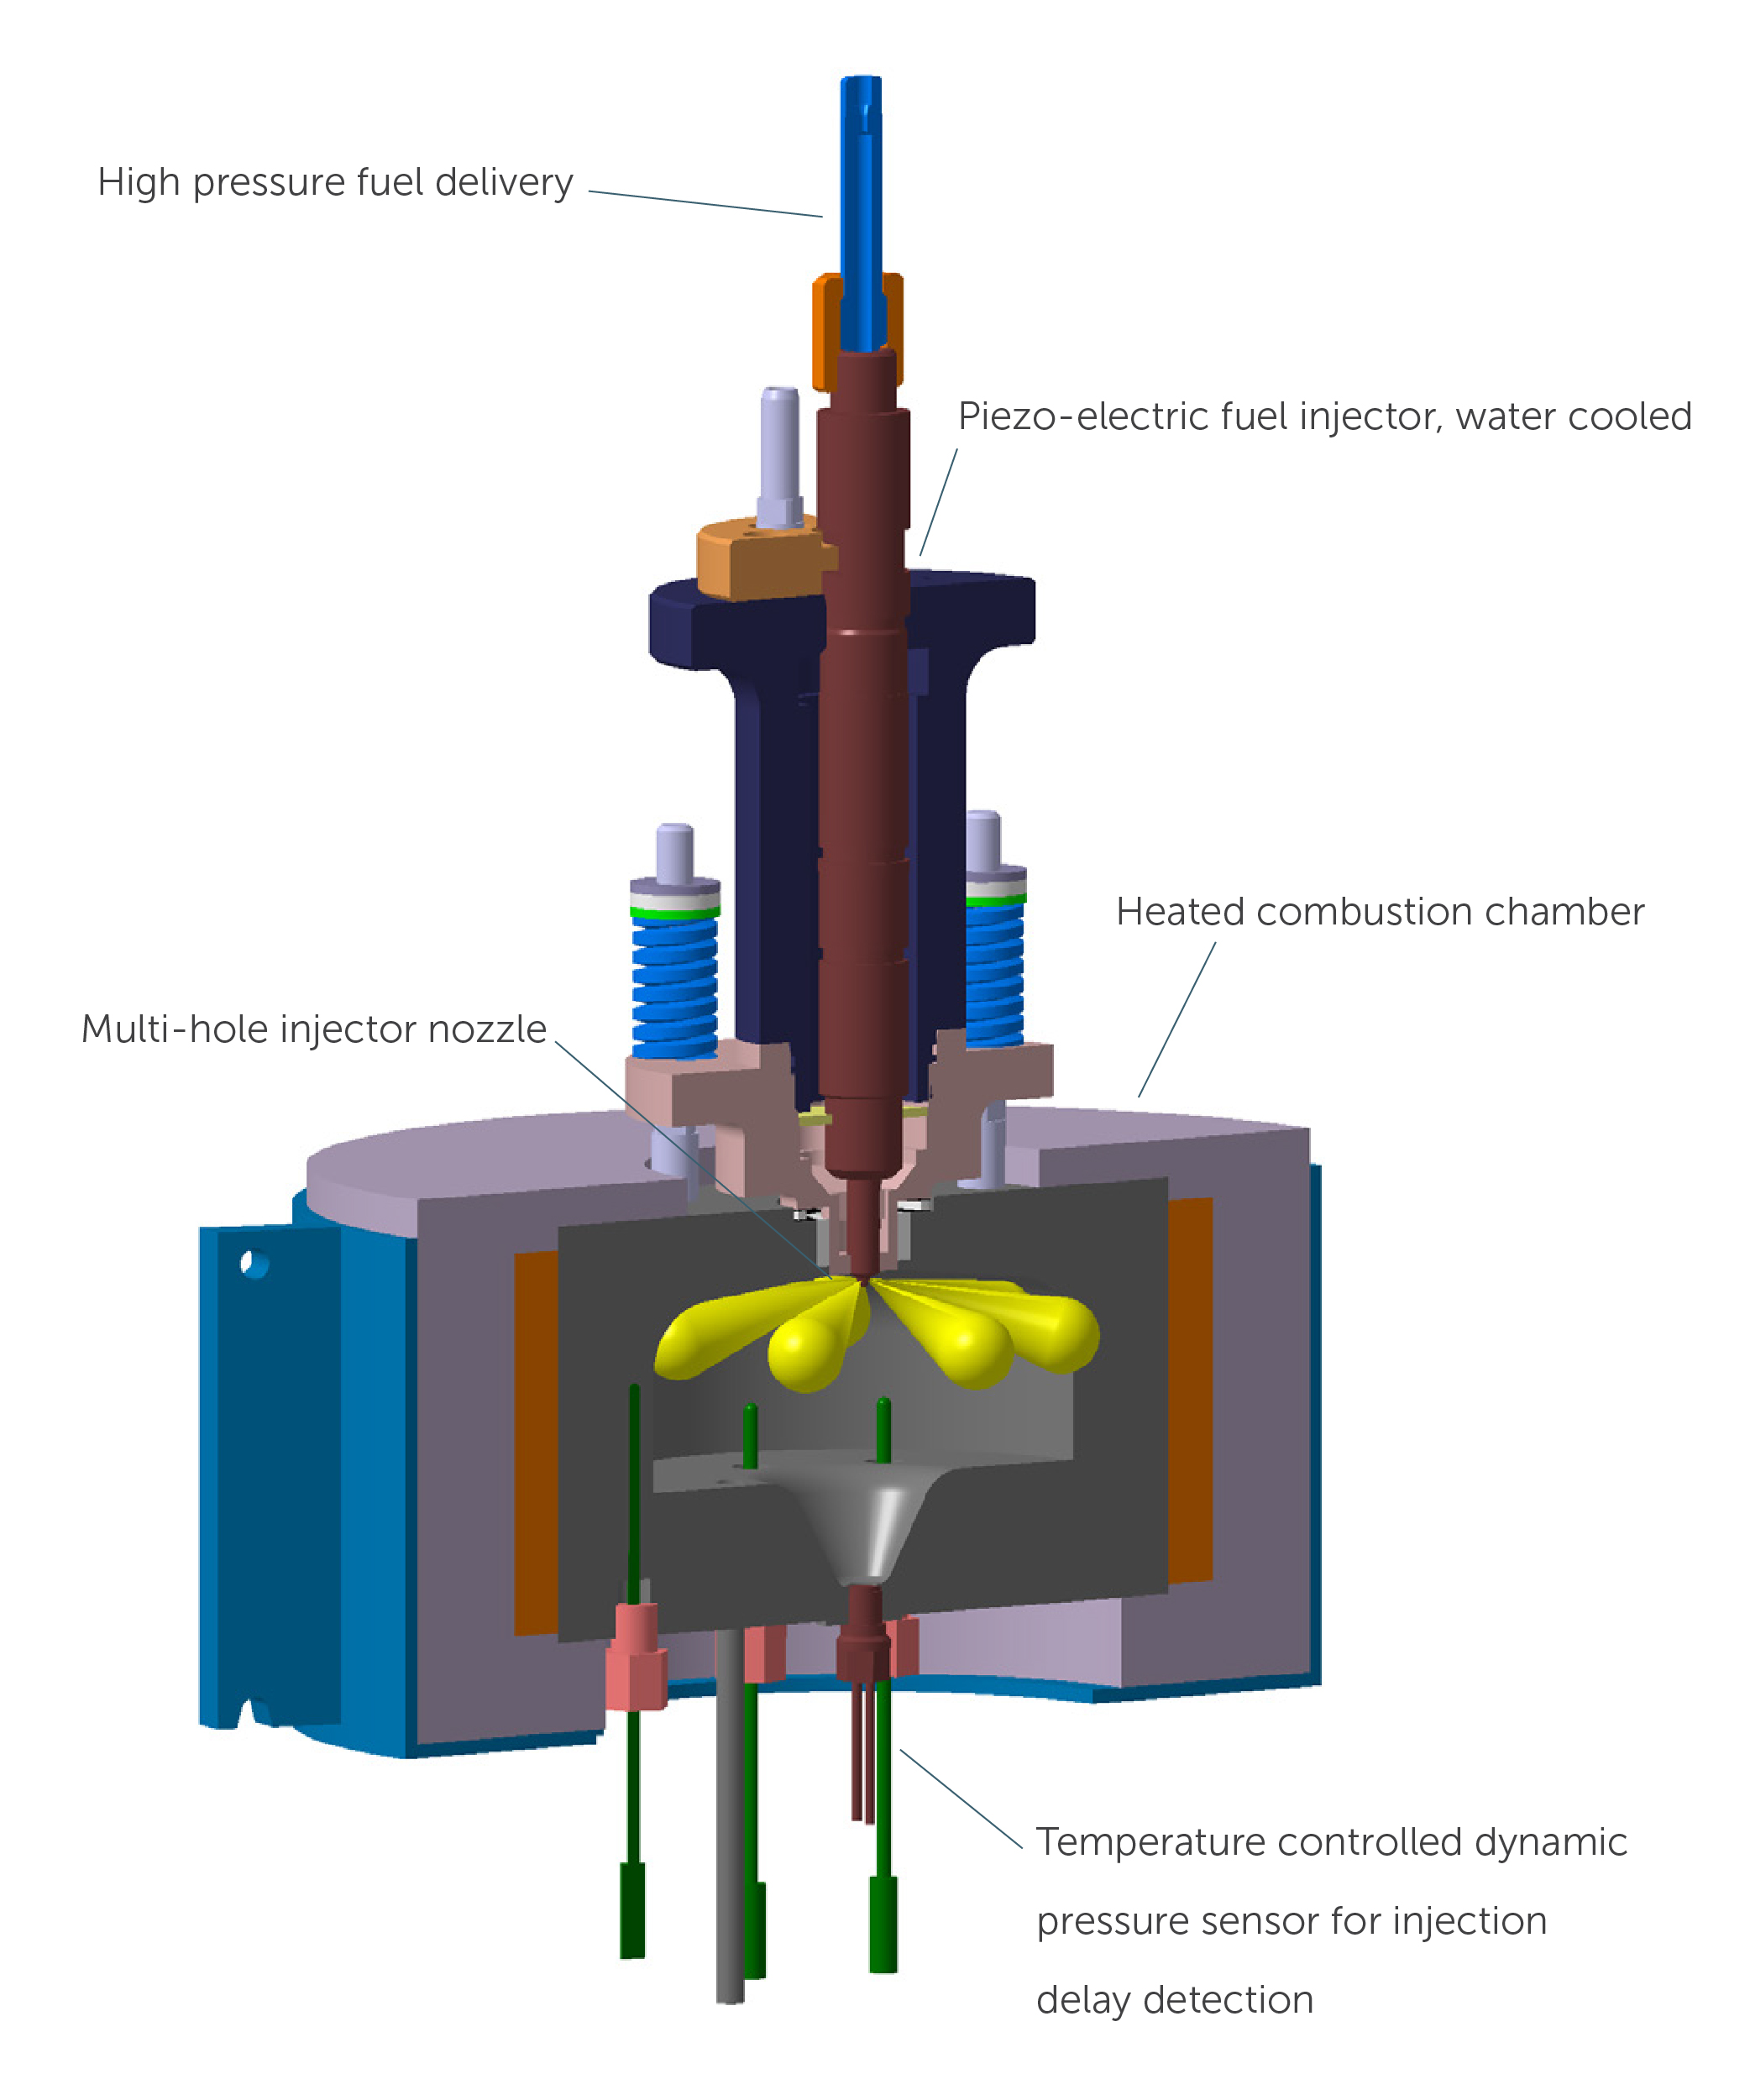 Chamber and injector features